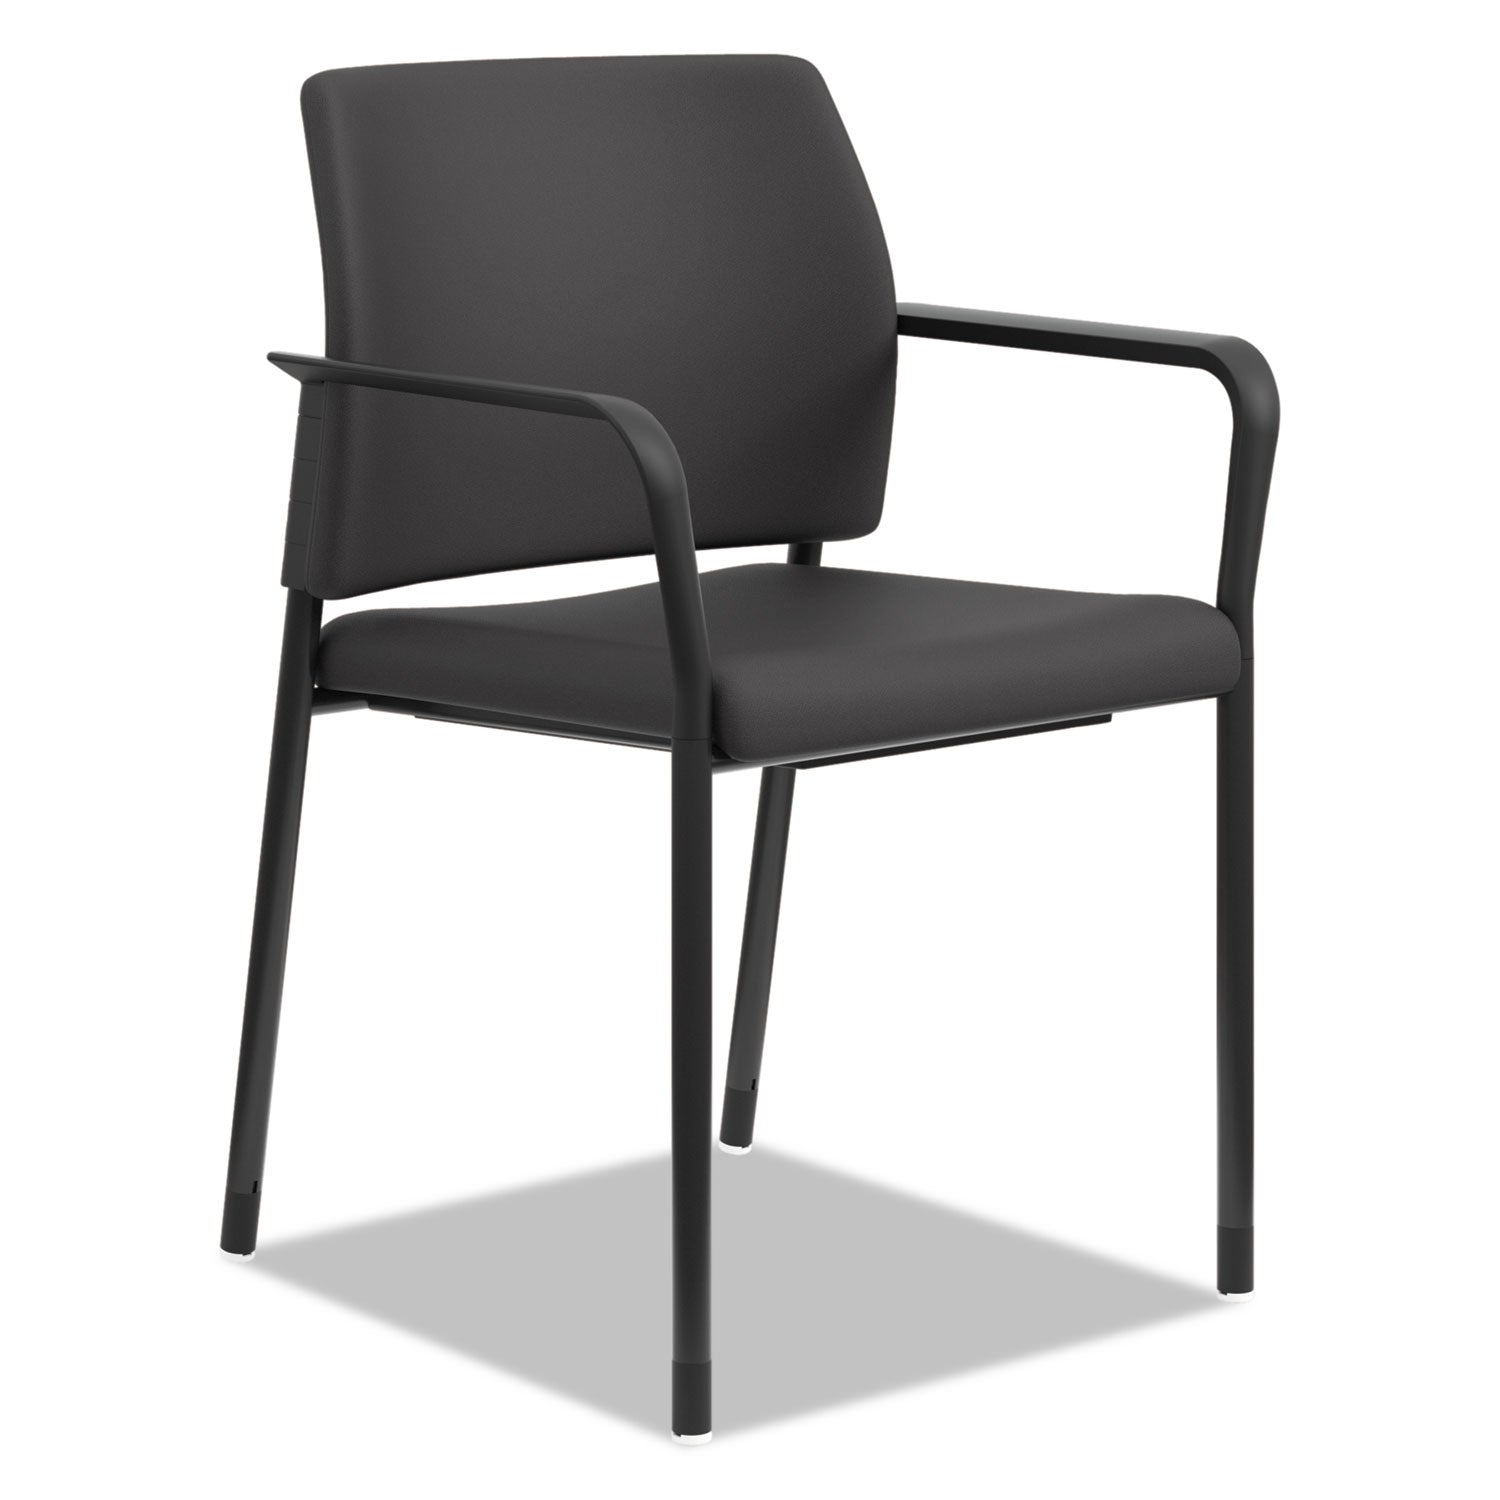 accommodate-series-guest-chair-with-arms-fabric-upholstery-2325-x-2225-x-32-black-seat-back-charblack-legs-2-carton_honsgs6fbc10c - 1